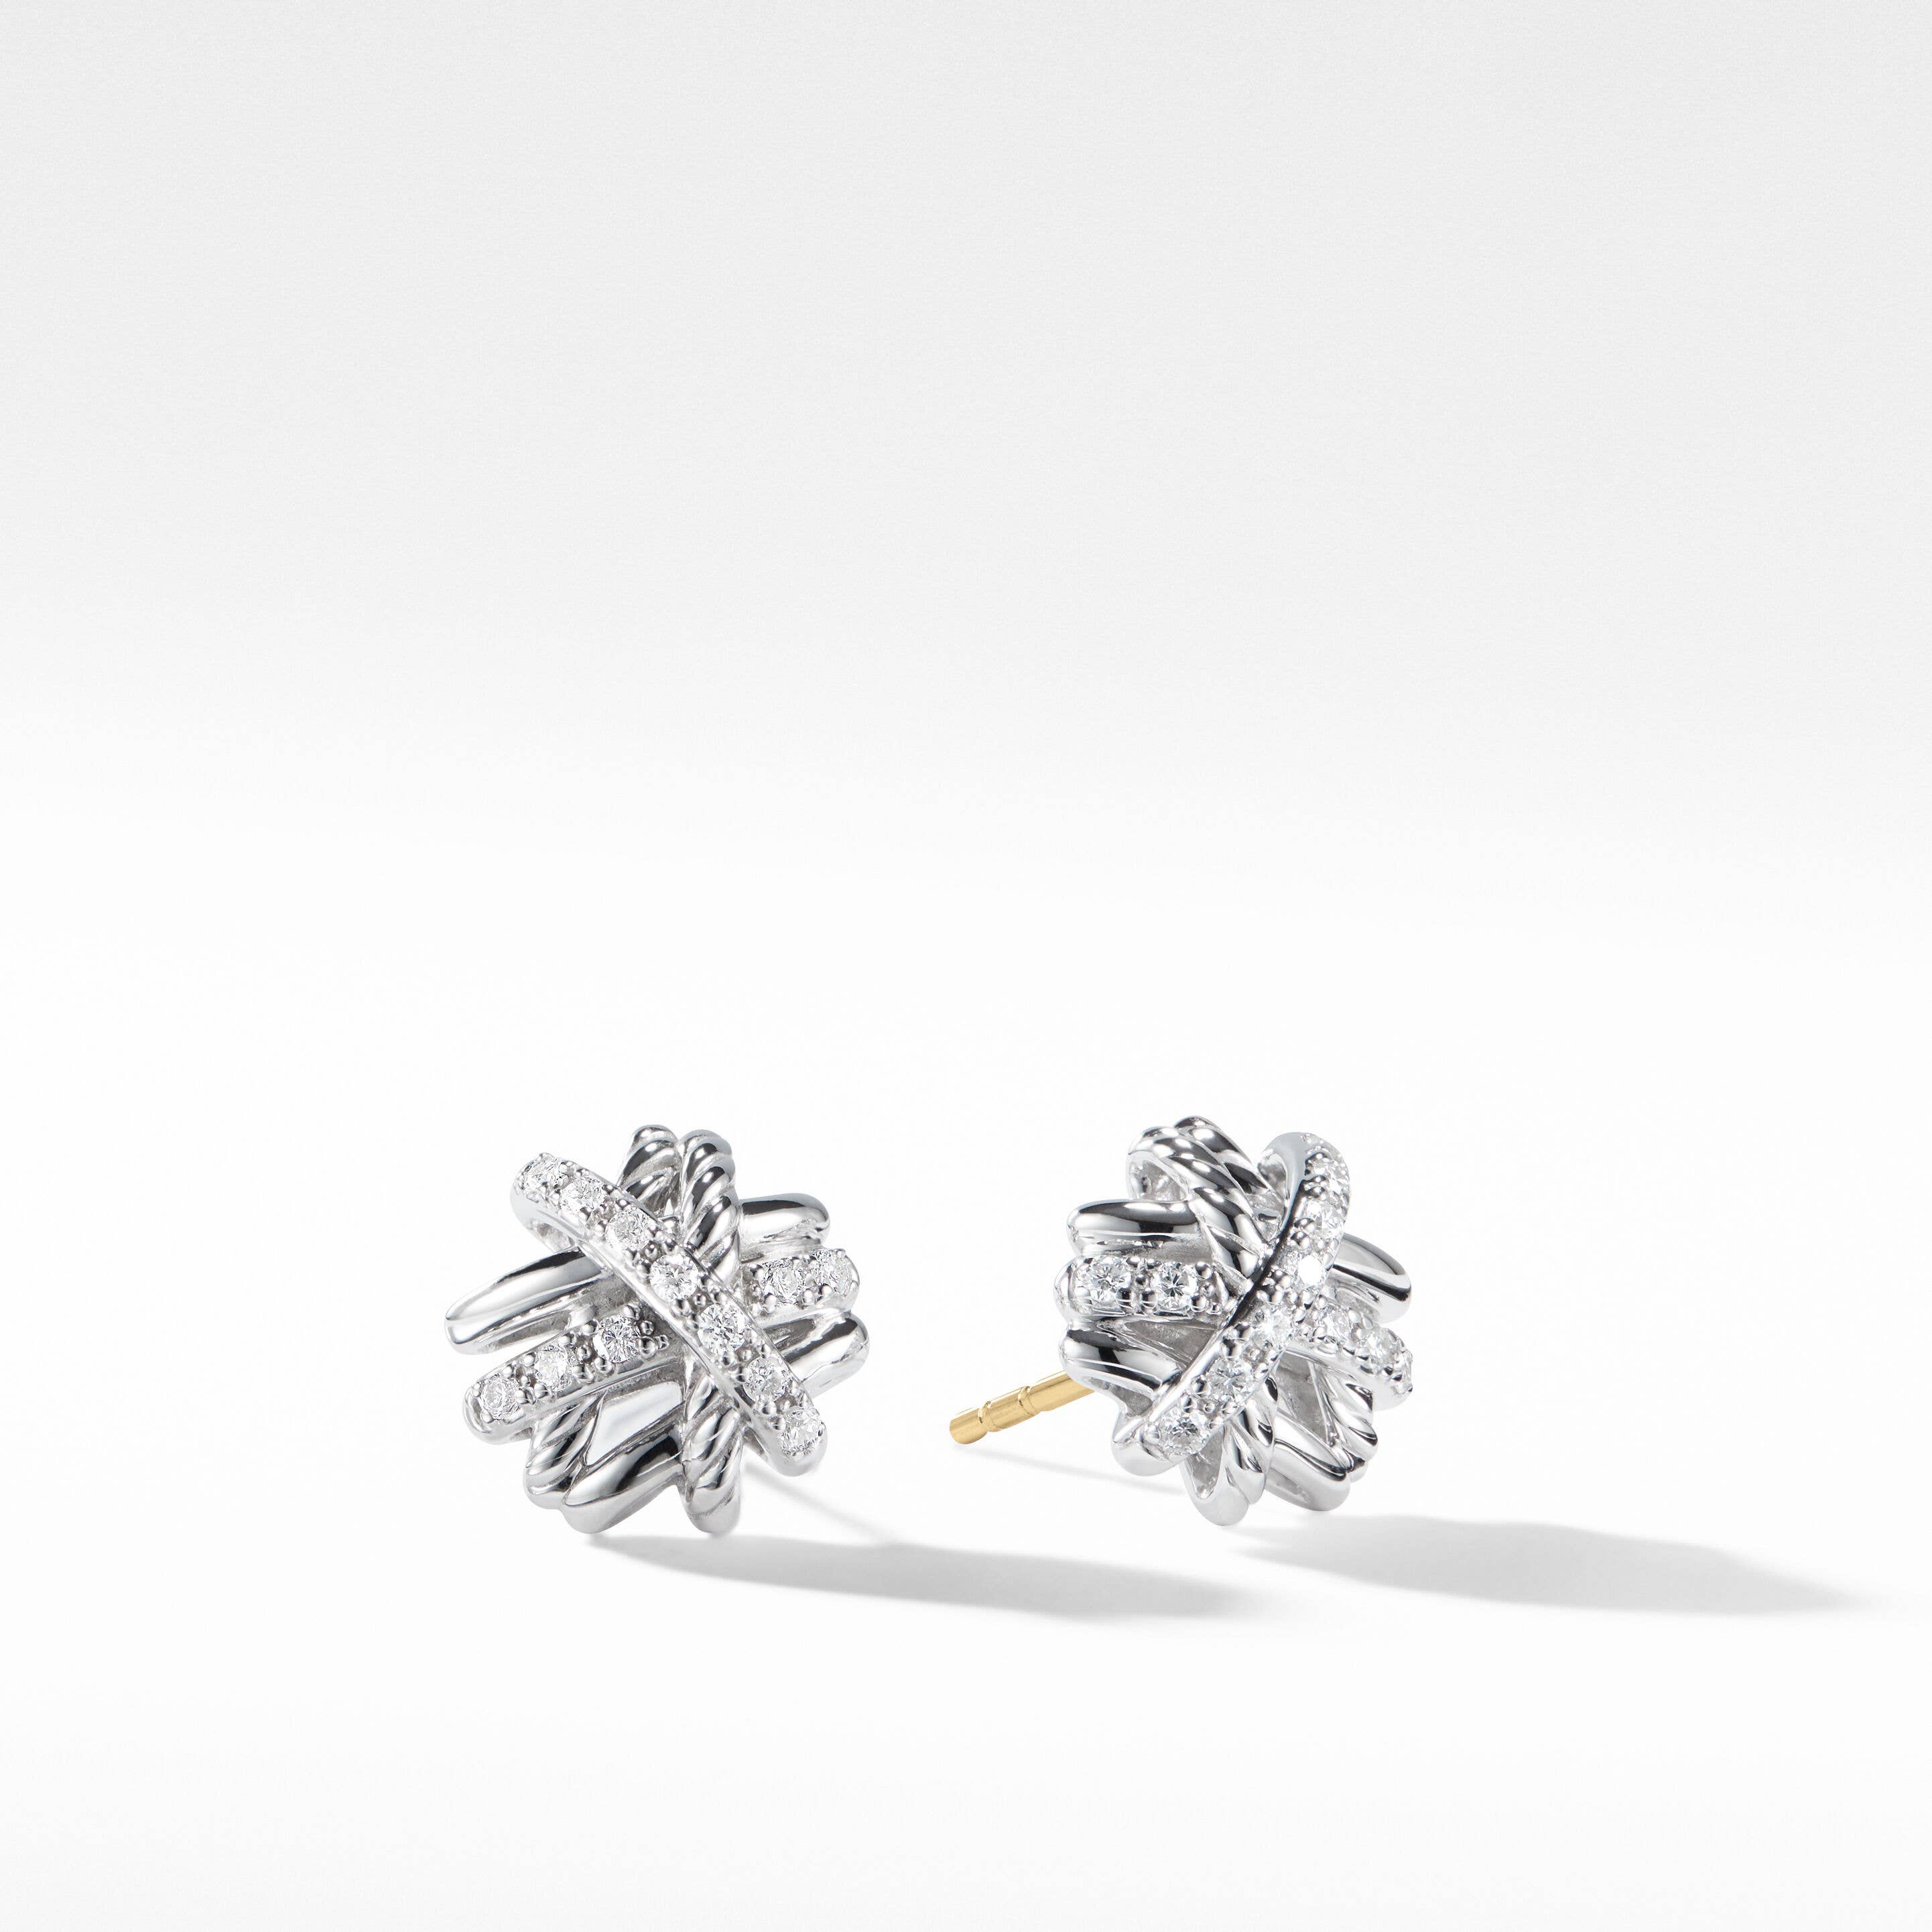 Crossover Stud Earrings in Sterling Silver with Pavé Diamonds